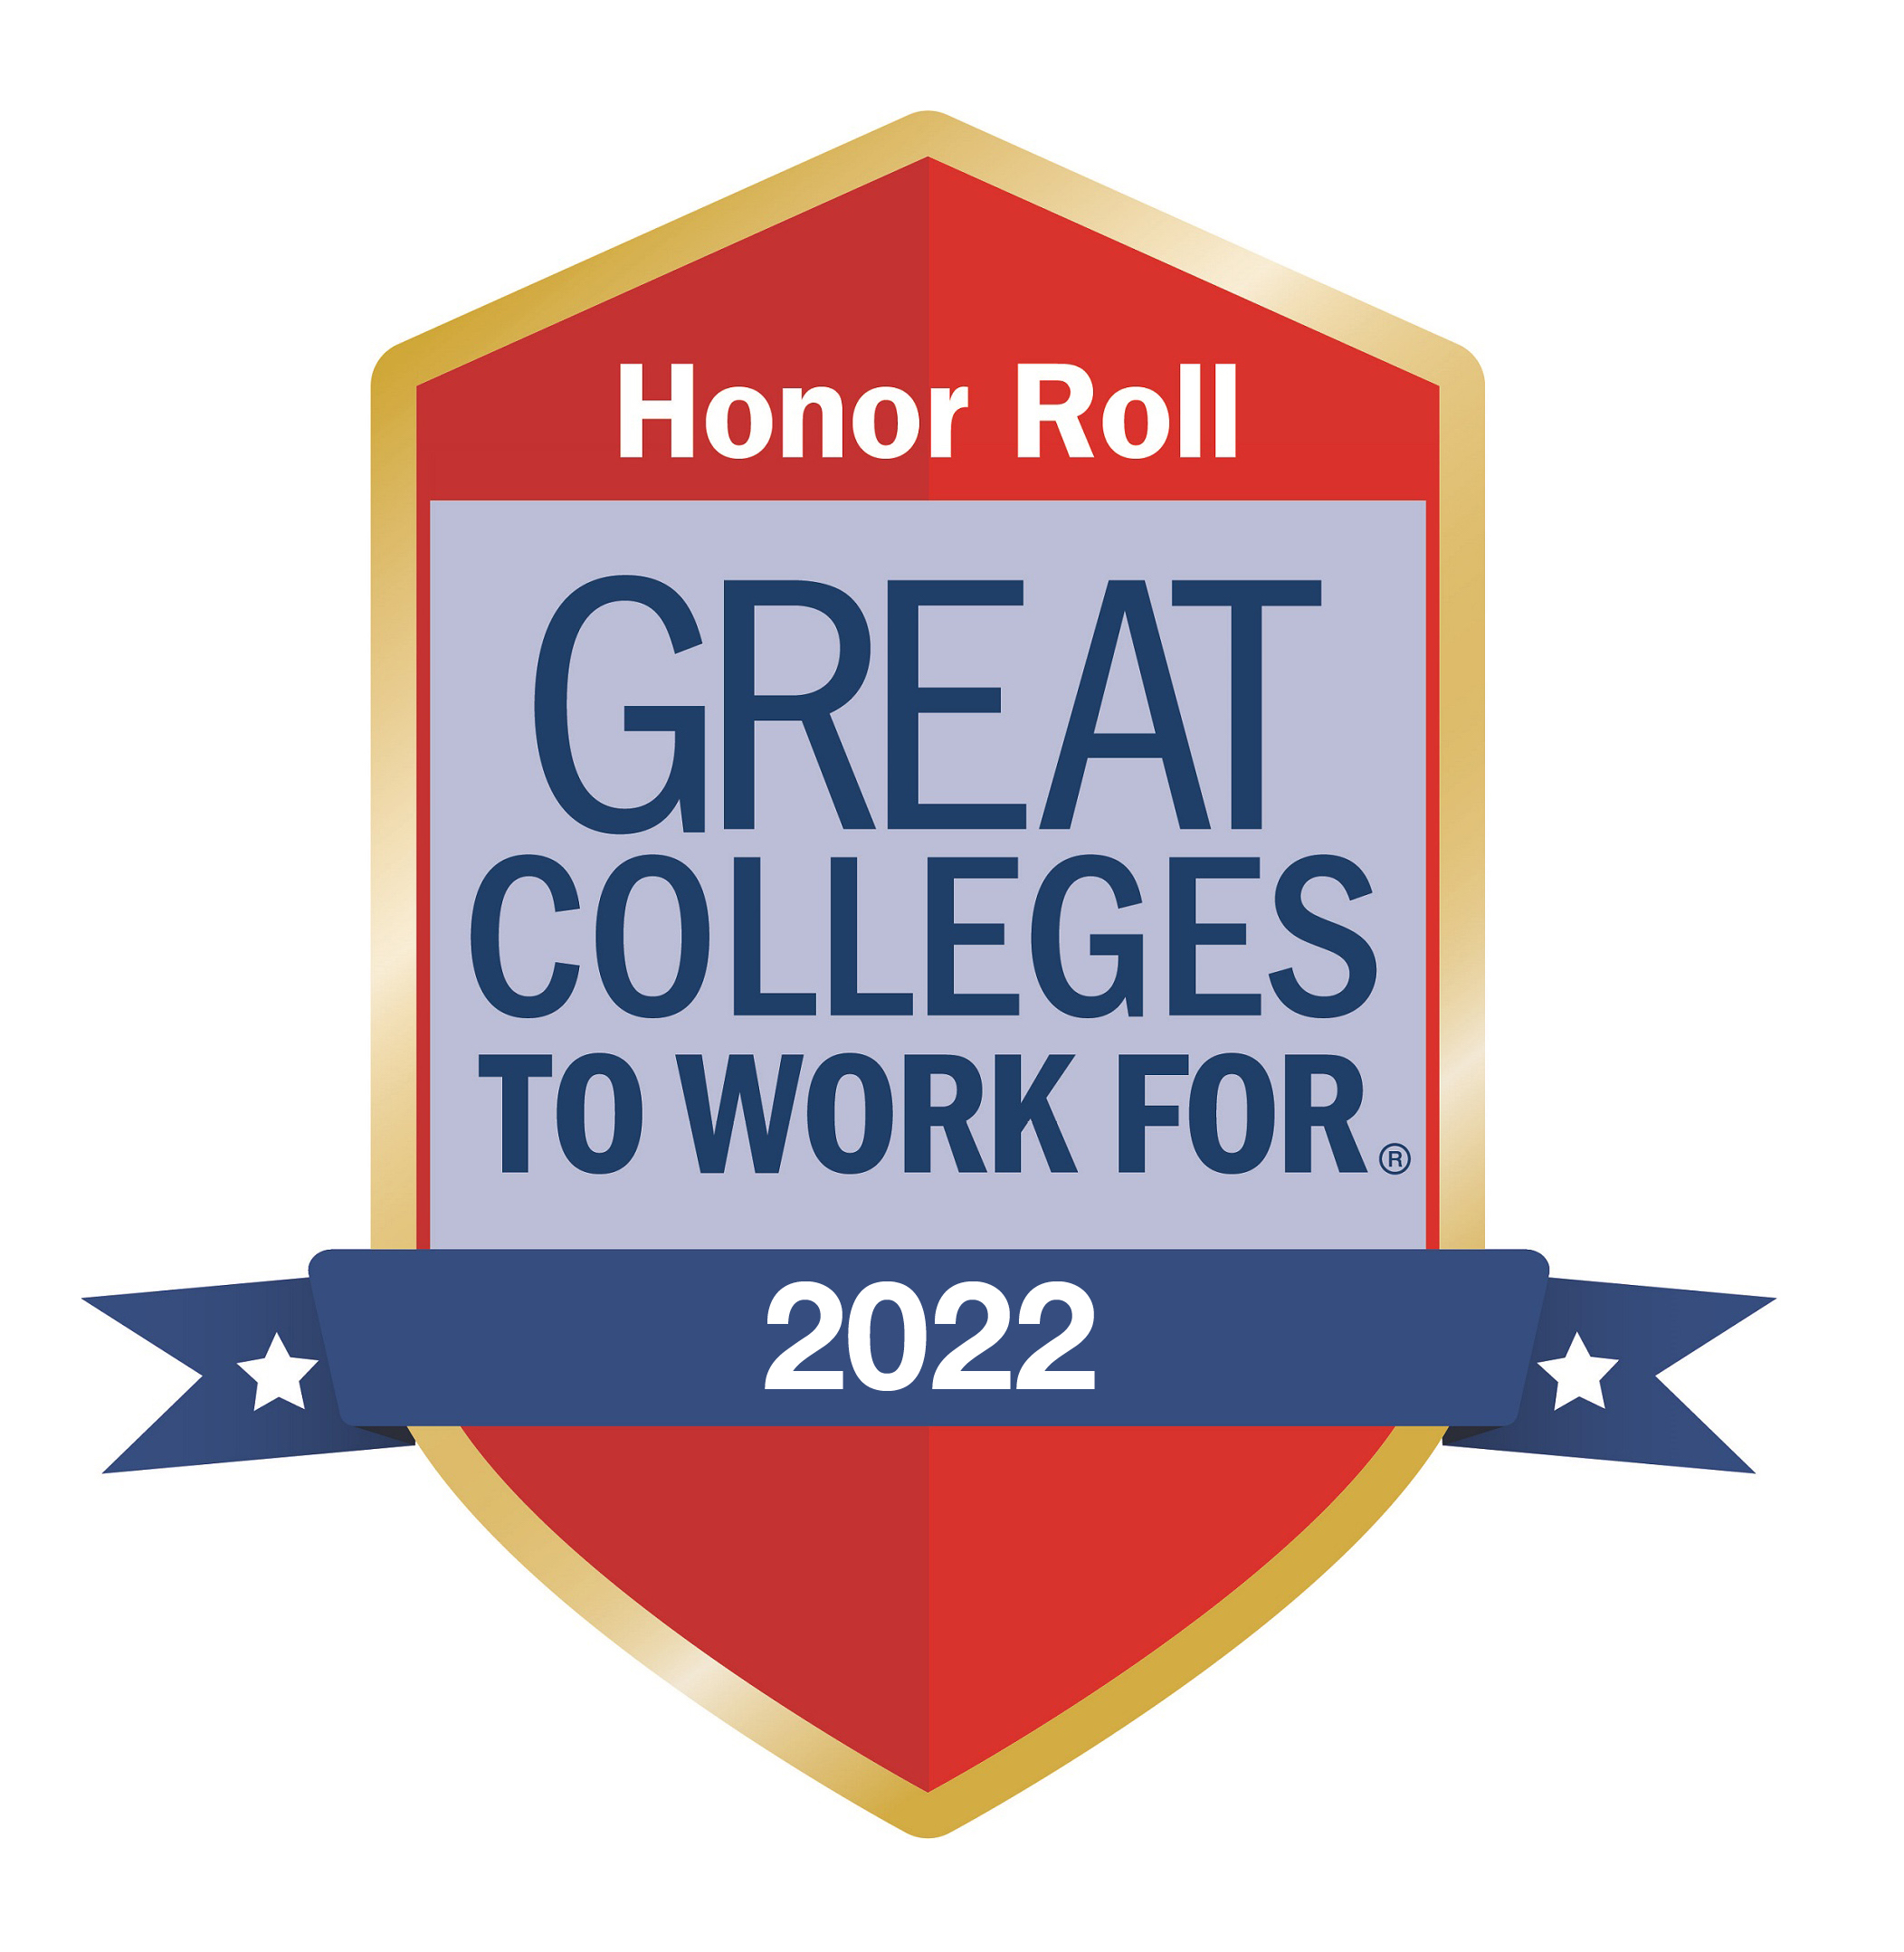 MGCCC named to the Honor Roll for Great Colleges to Work For